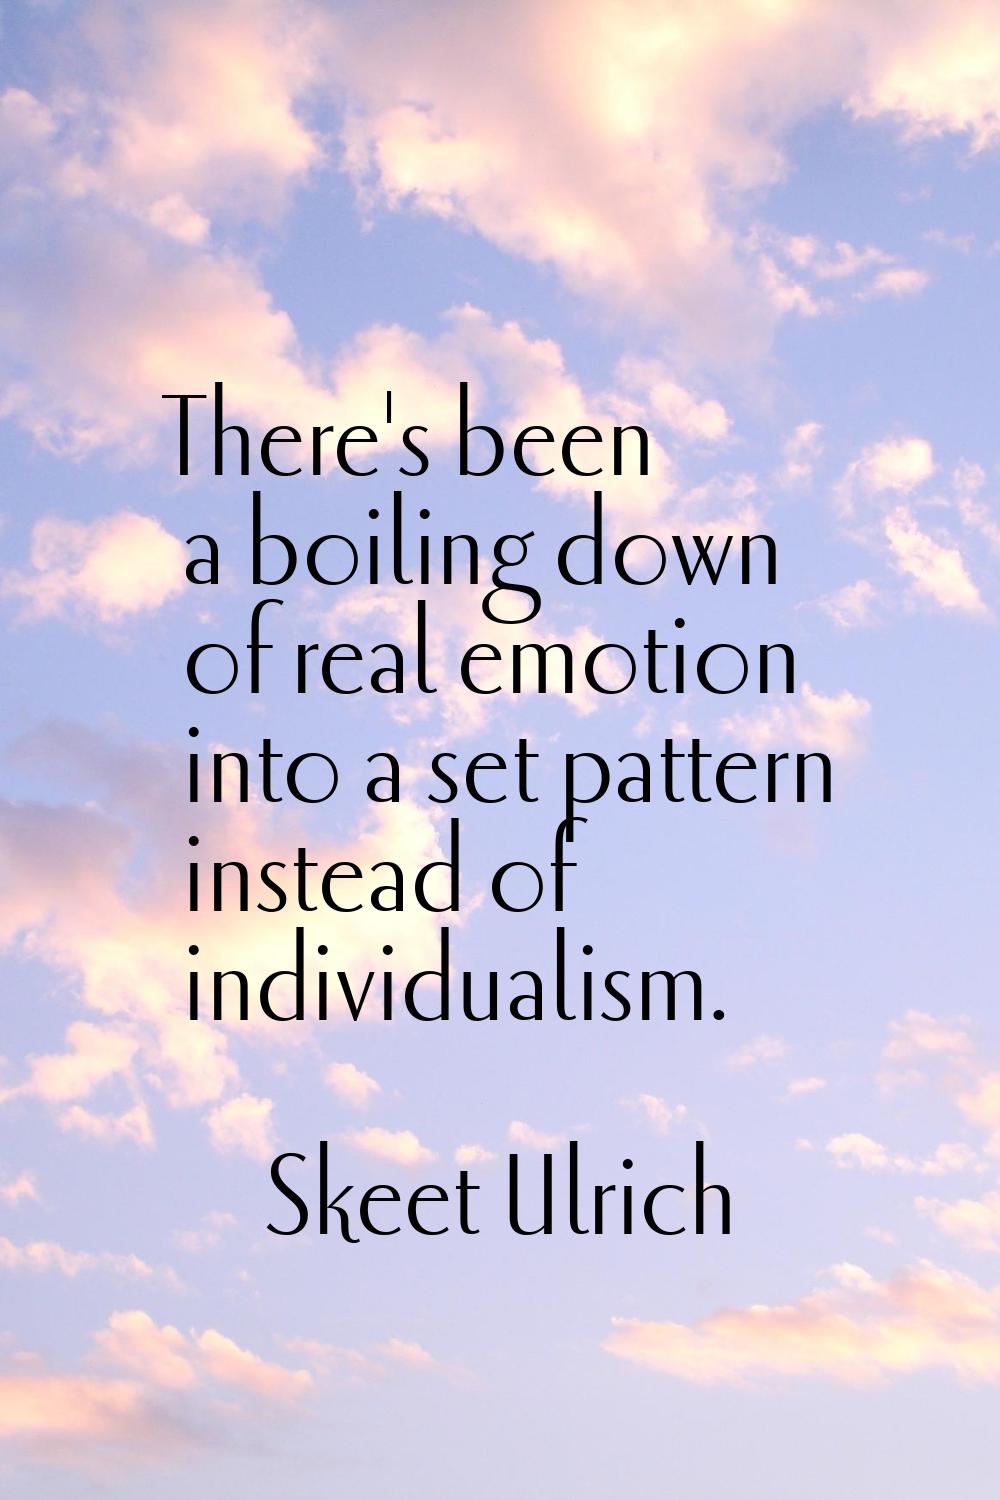 There's been a boiling down of real emotion into a set pattern instead of individualism.